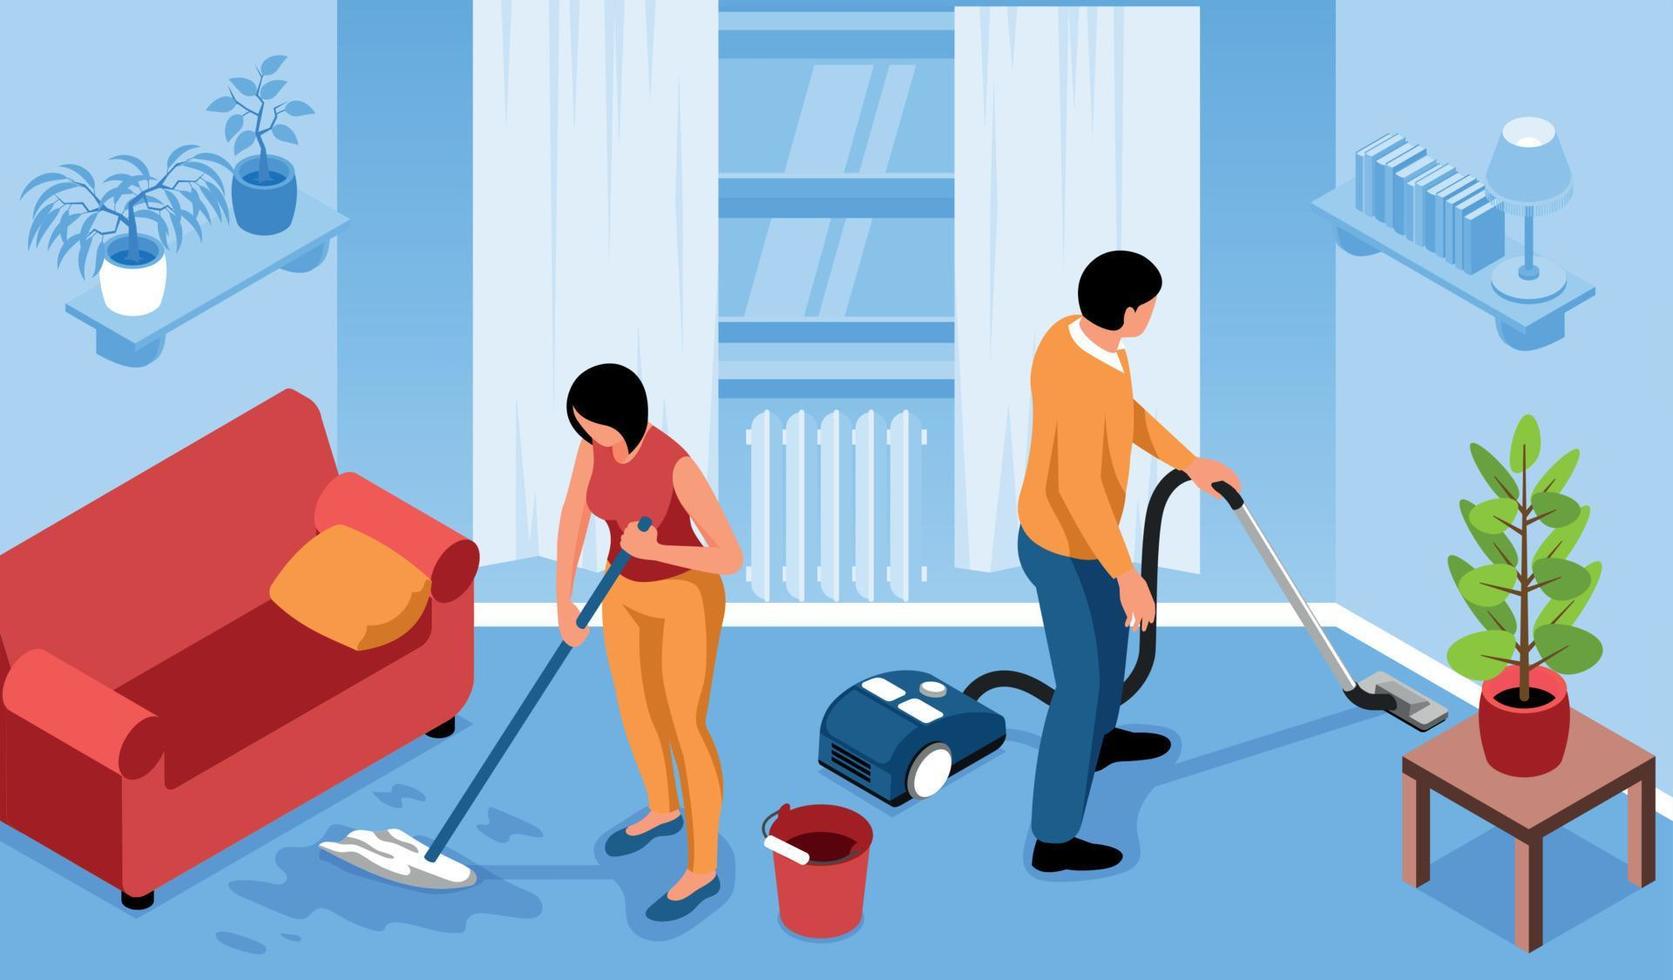 Living Room Cleanup Composition vector